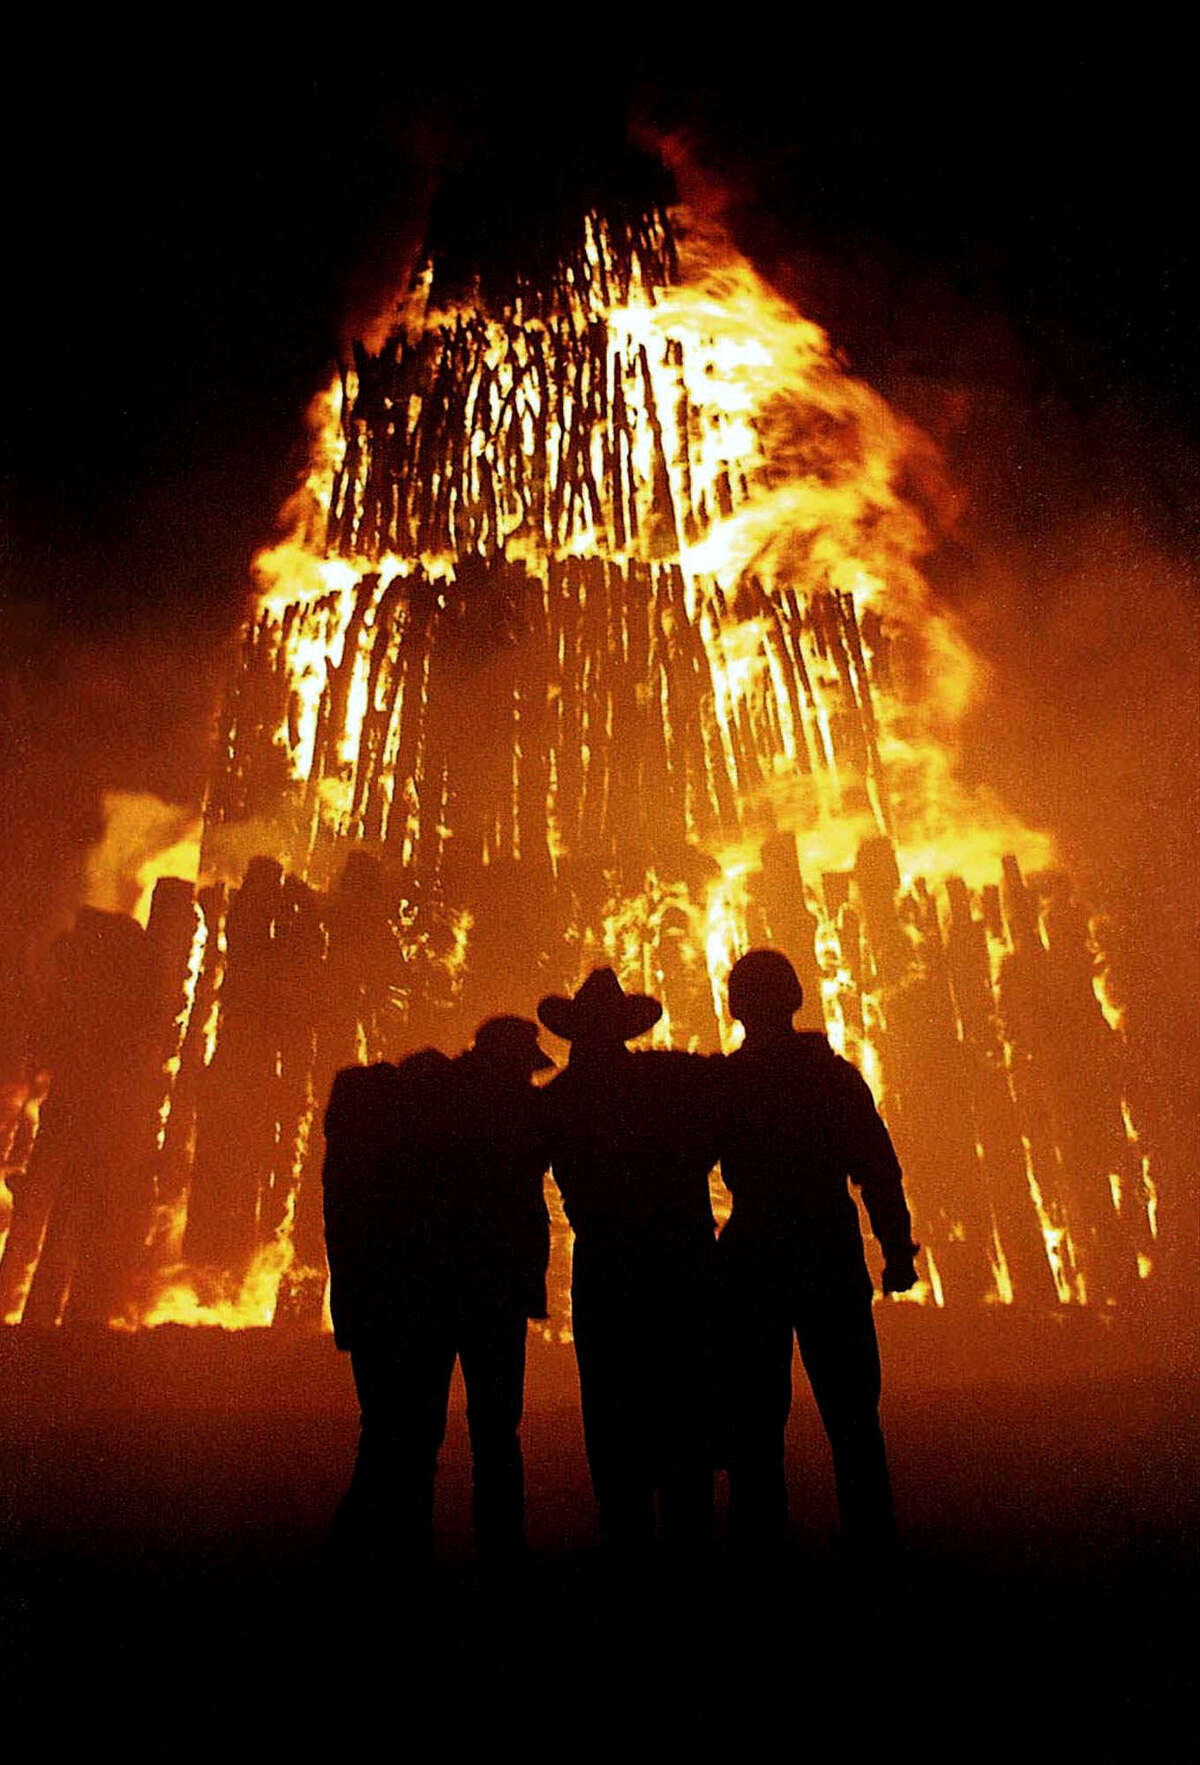 Texas A&M students huddle in front of a bonfire on Nov. 26, 1996, in College Station. At a university steeped in tradition, the burning of bonfire on the night before the annual football game against archrival Texas remains the most hallowed ritual at Texas A&M. But since the stack of more than 5,000 logs collapsed on Nov. 18, 1999, killing 12 Aggies and injuring 27 others, the 90-year-old tradition has been on hold and its future remains in doubt.